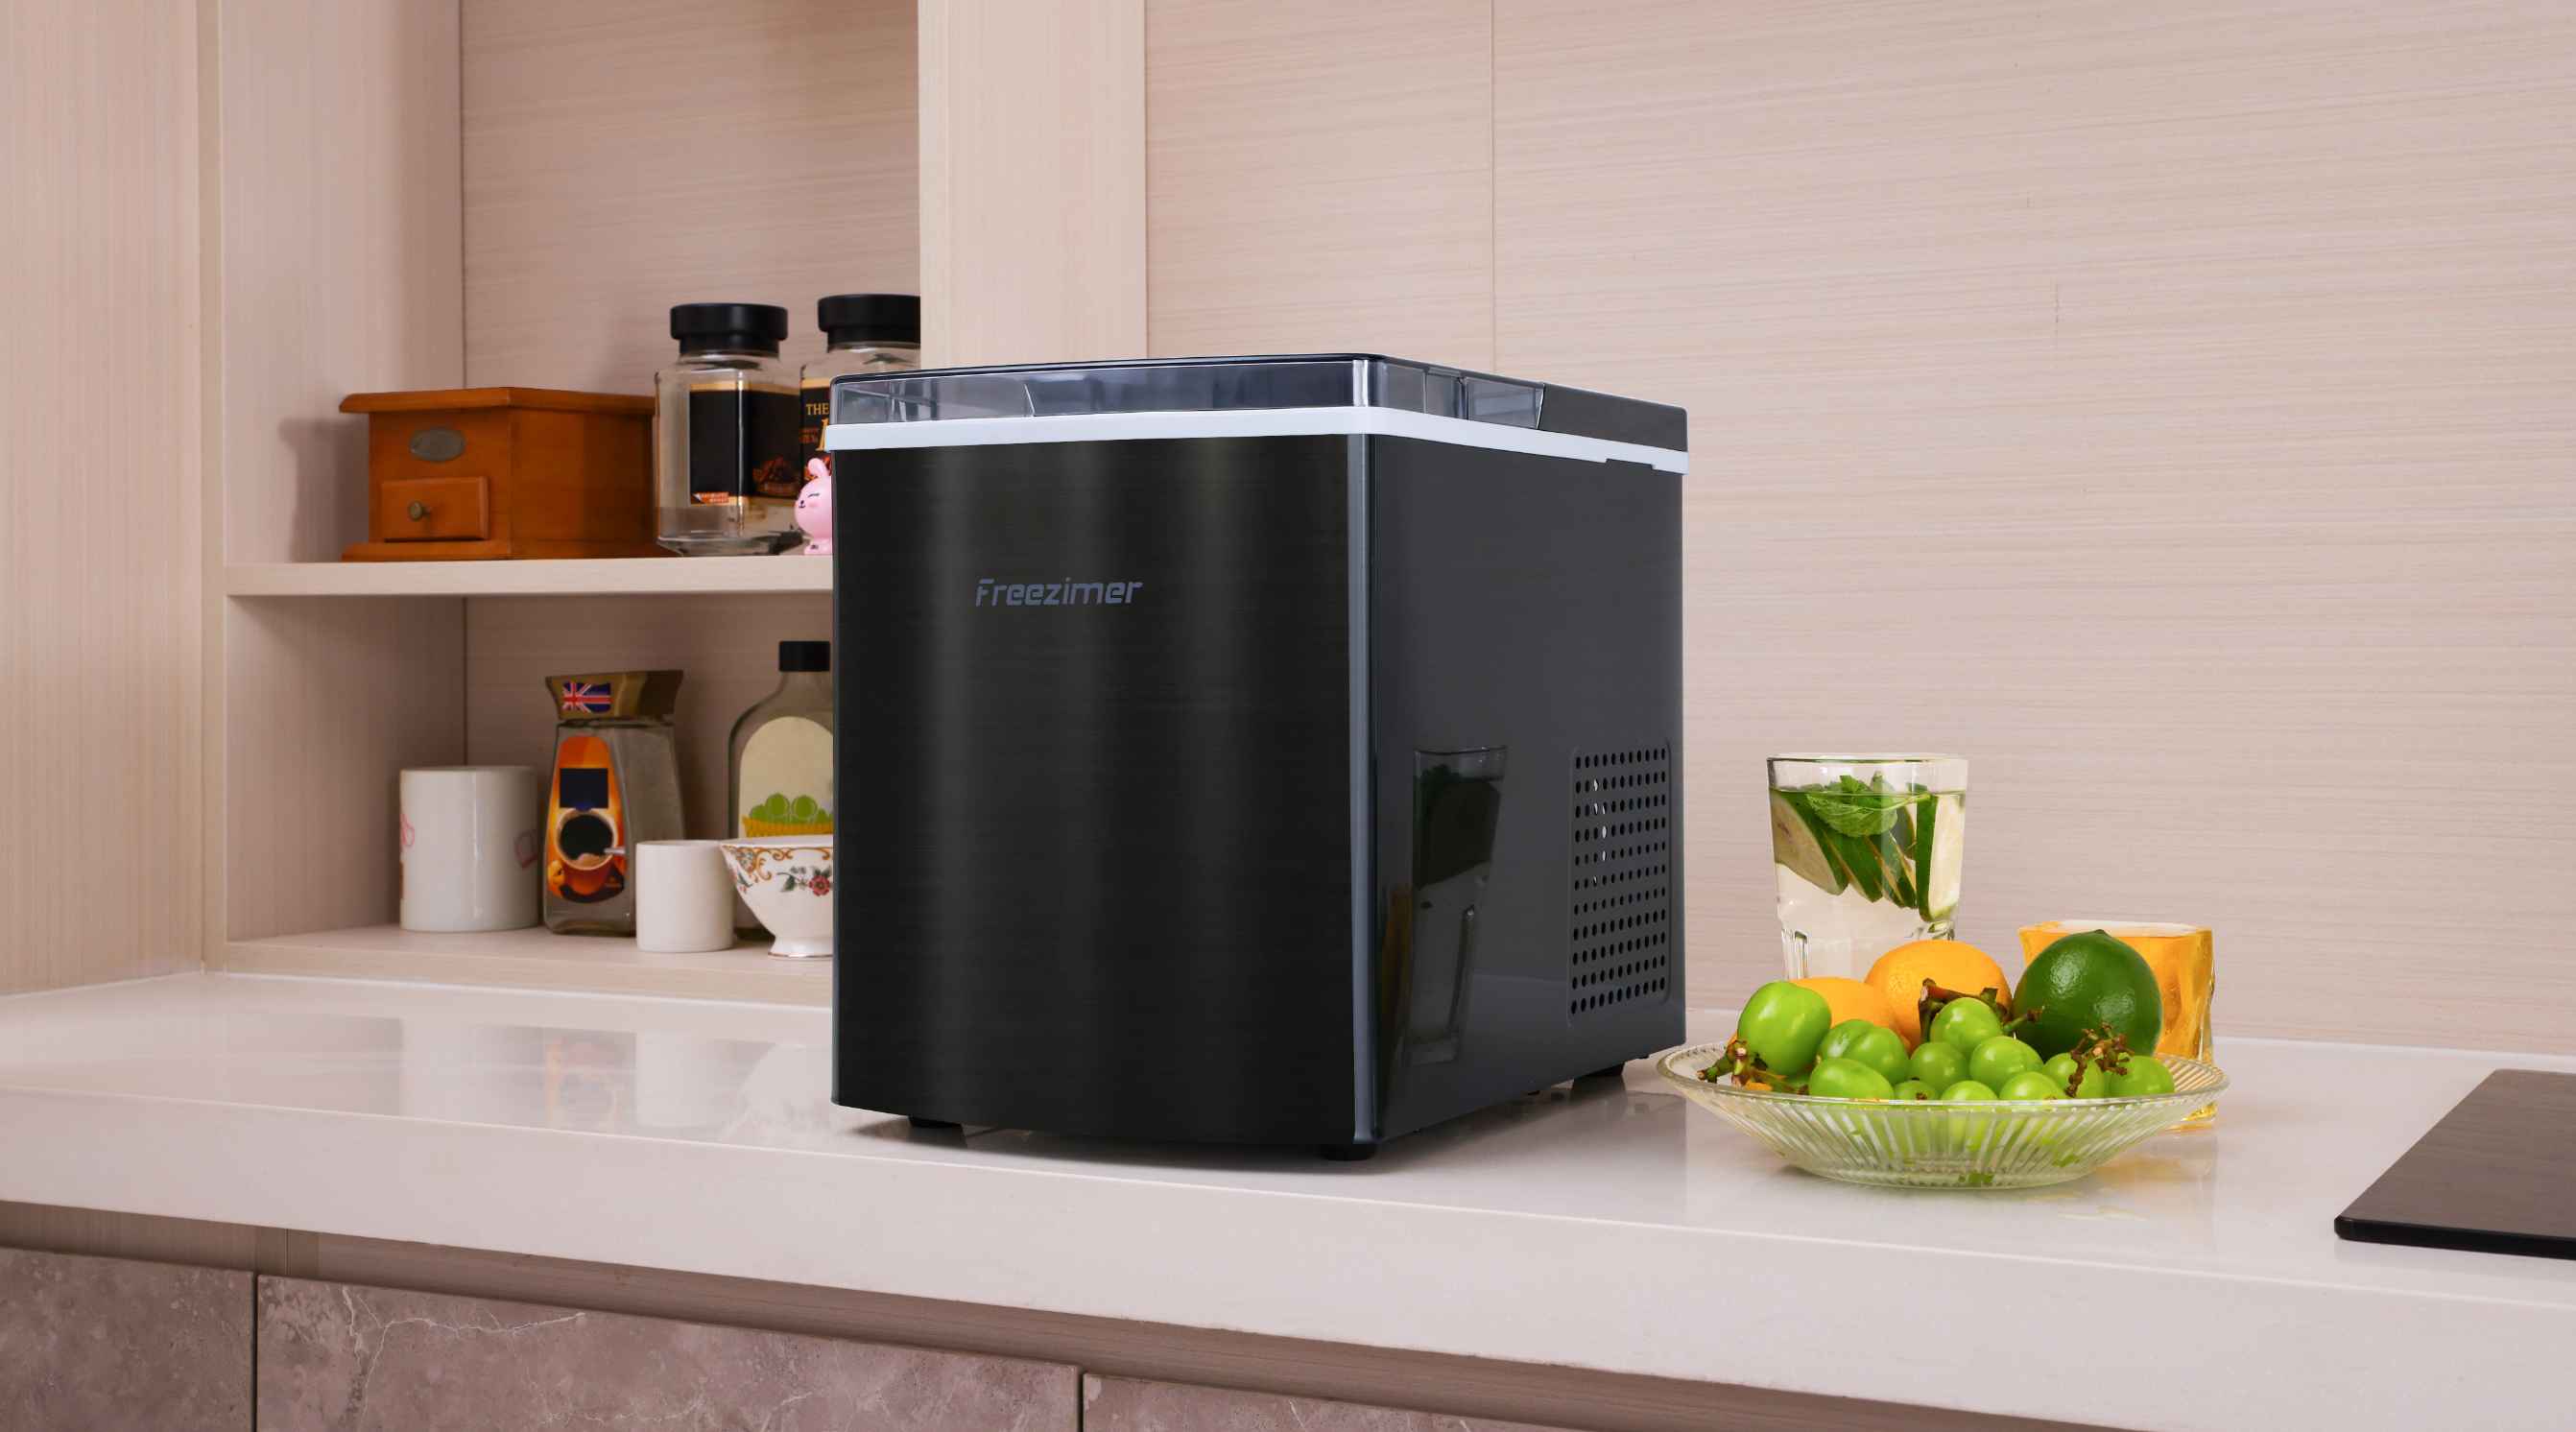 10 Reasons You Need a Countertop Ice Maker in Your Life